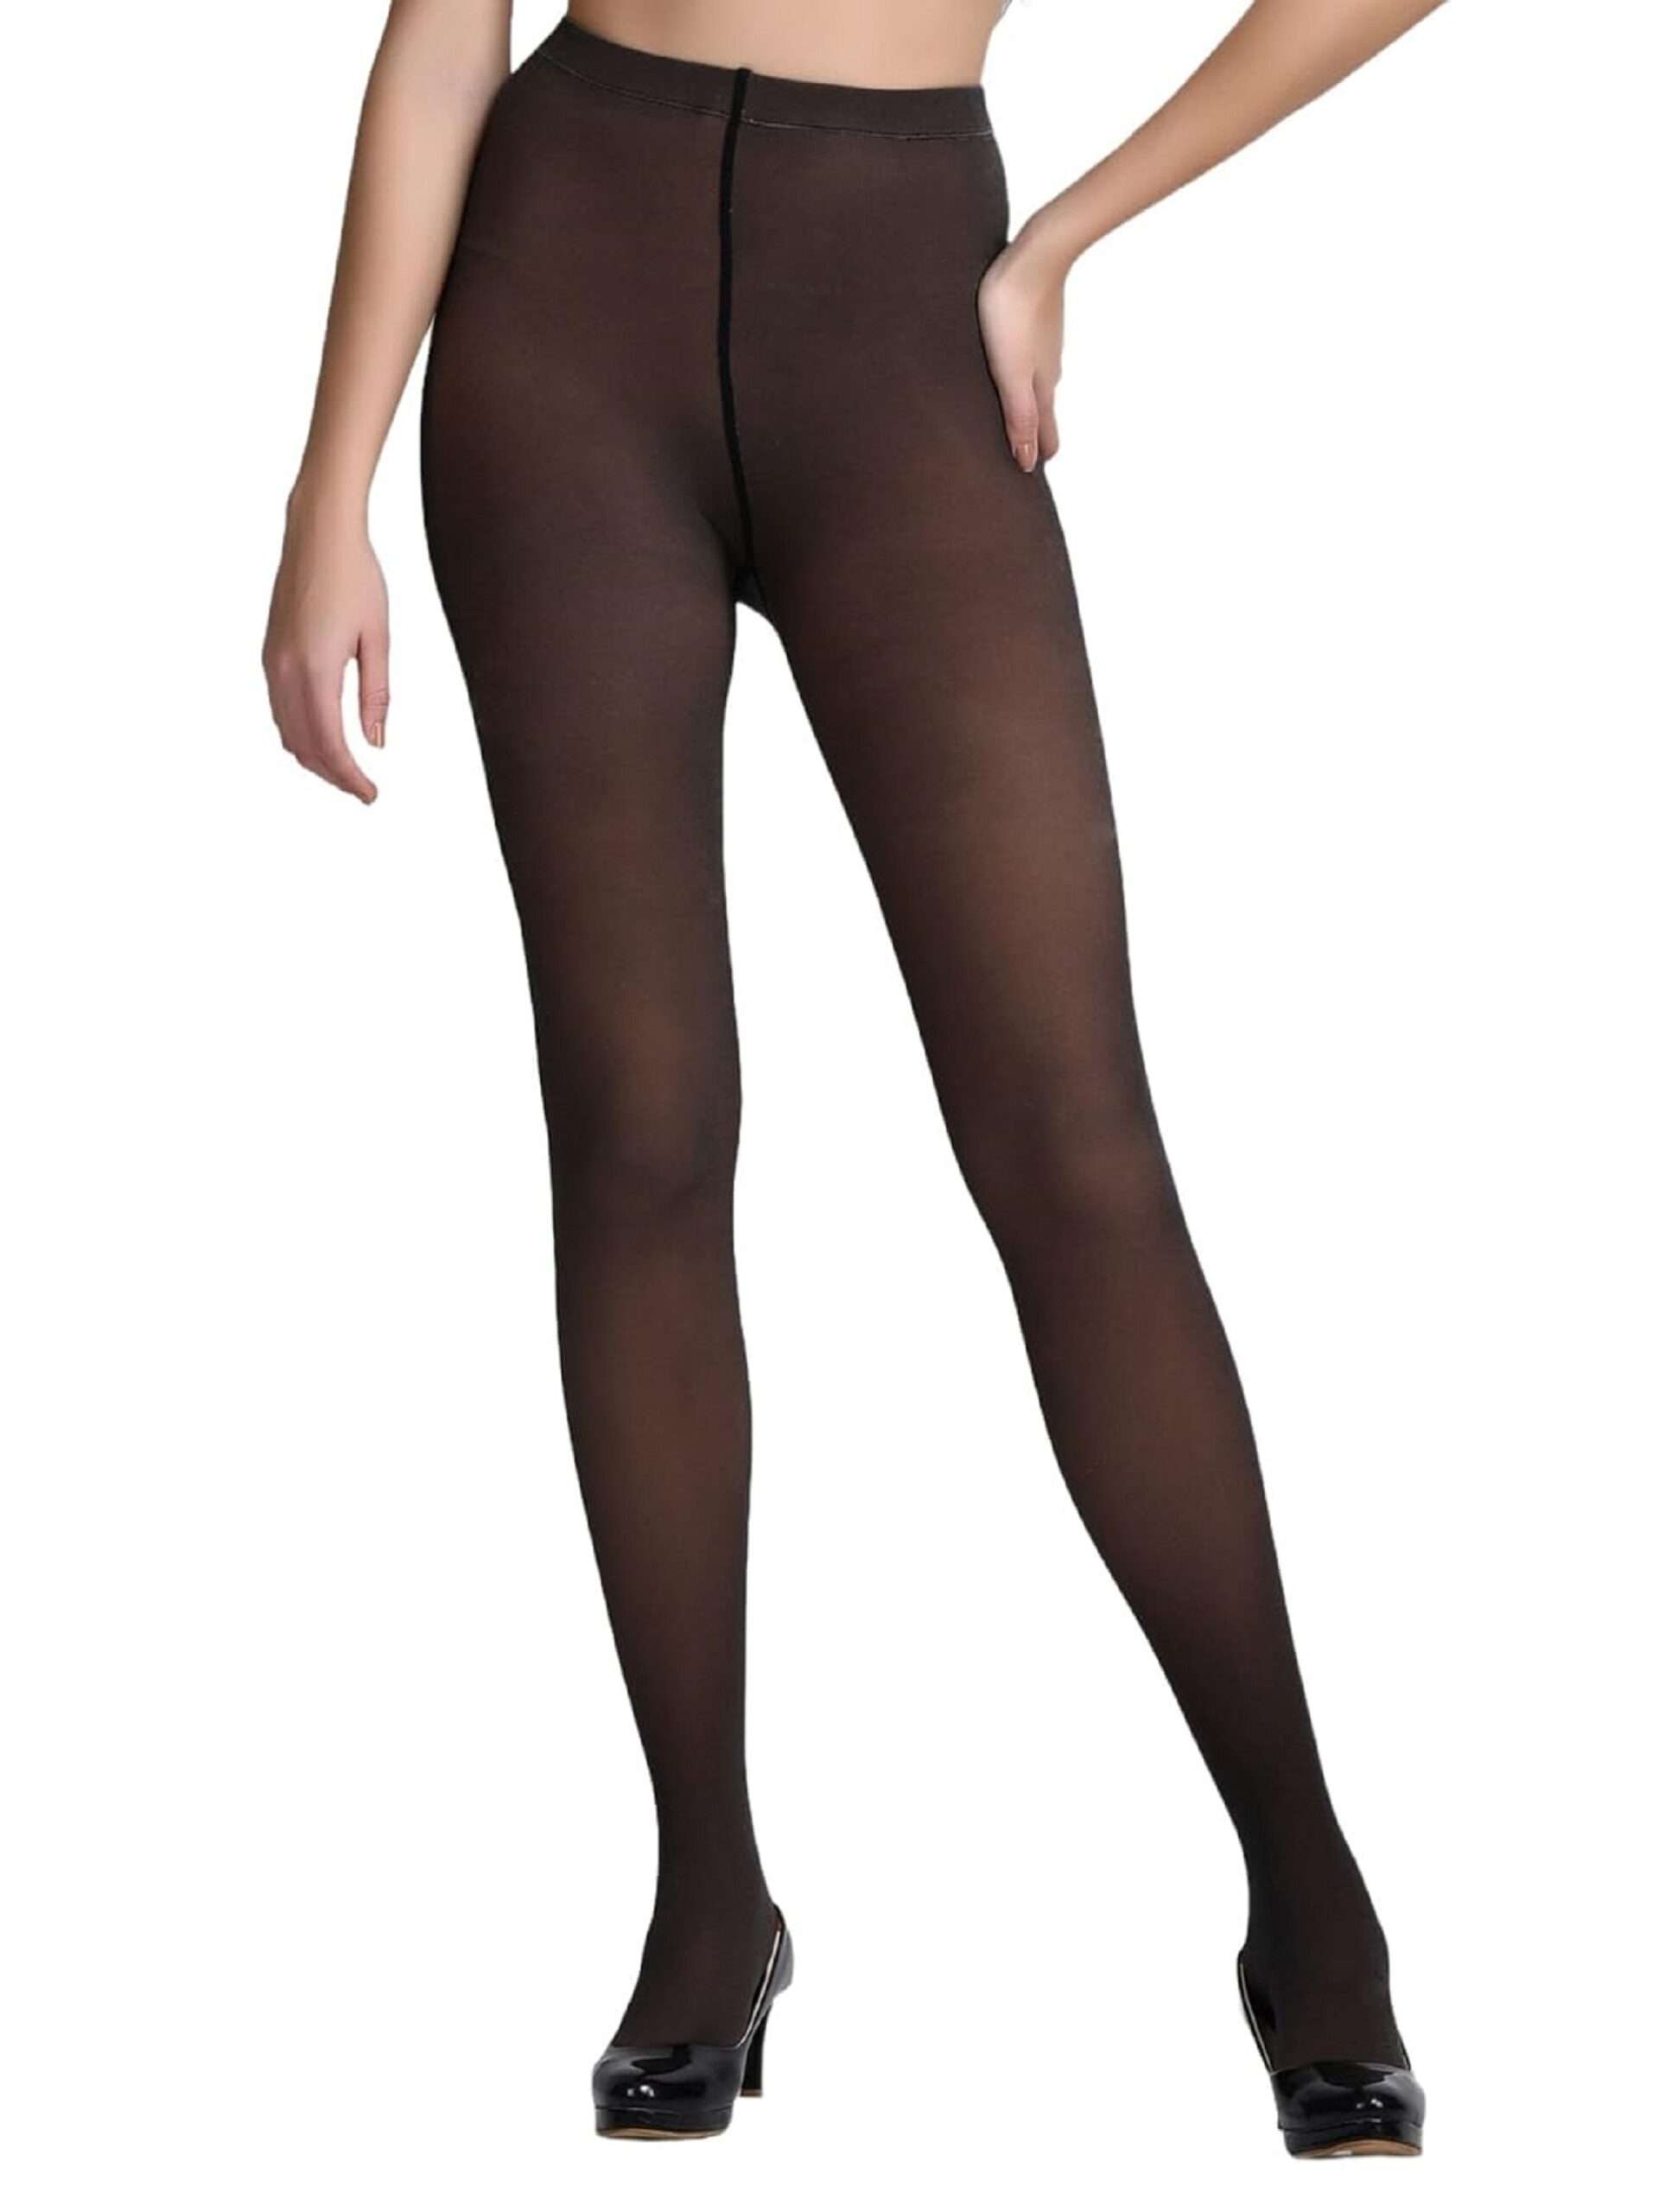 Woolen Yarn Knitted Footed Tights Pantyhose Winter Warm Stretch Stockings  Women | eBay